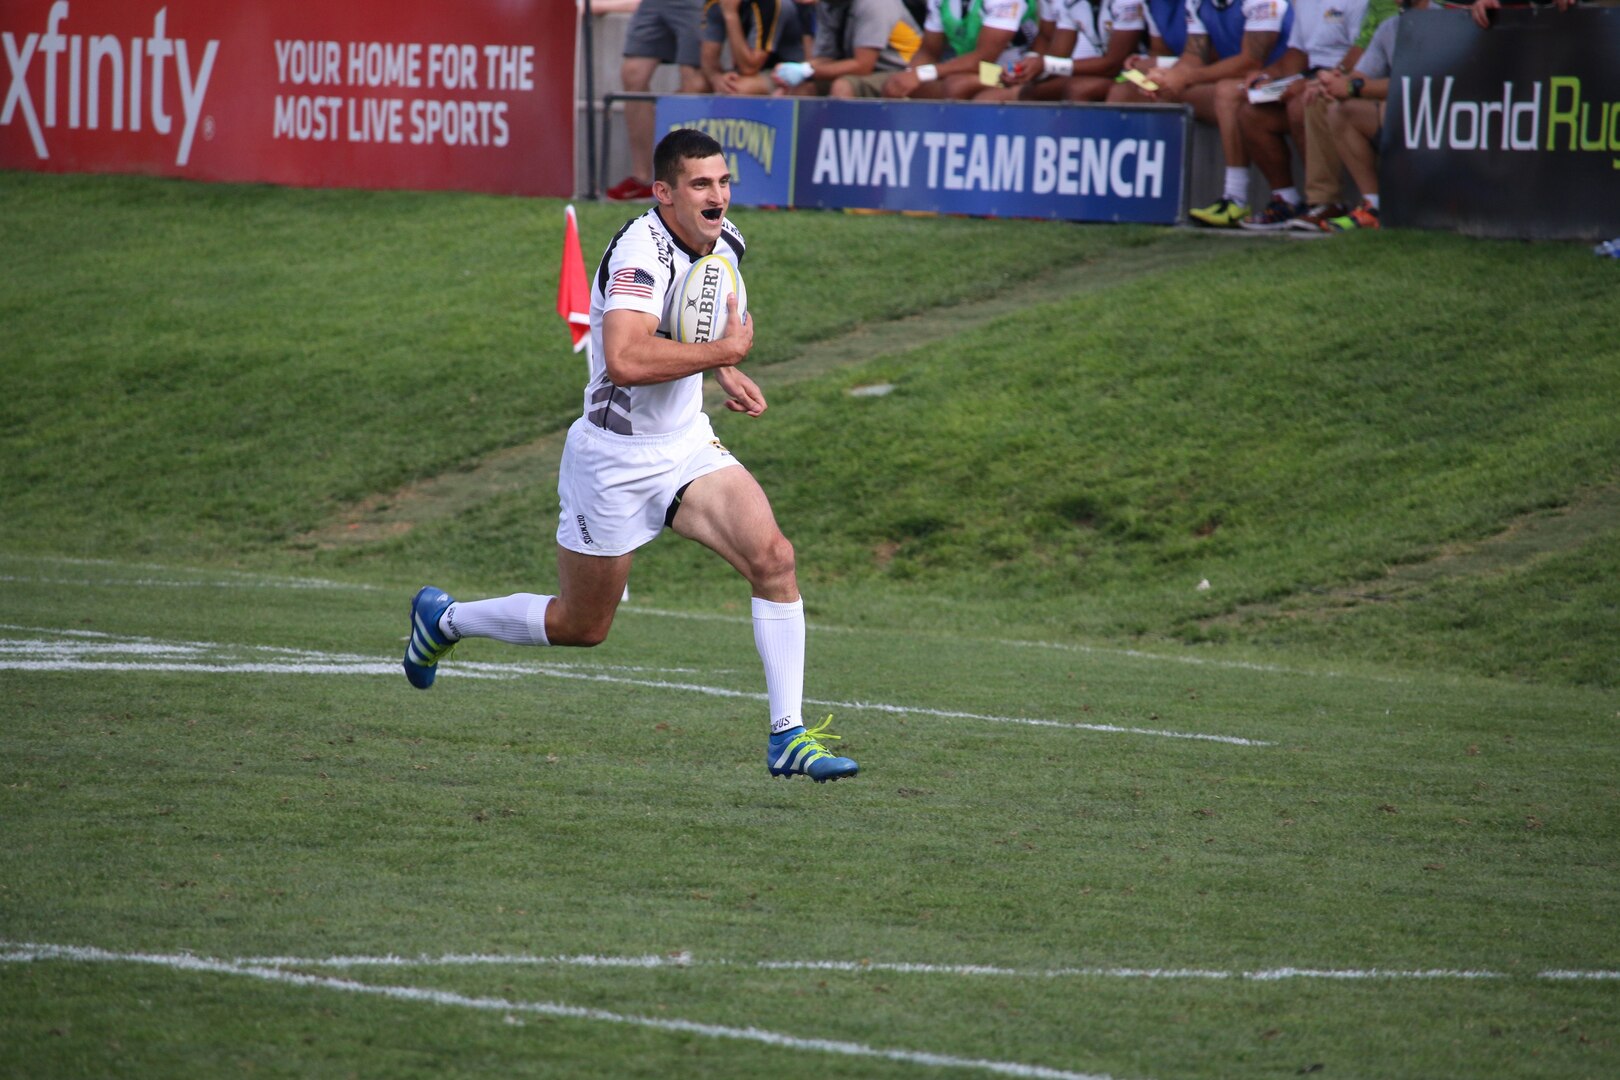 Army's Spc. Rocco Mauer takes off to score one of his four tries during Army's 55-5 rout over the Air Force to win their fourth consecutive Armed Forces Rugby Championship gold medal